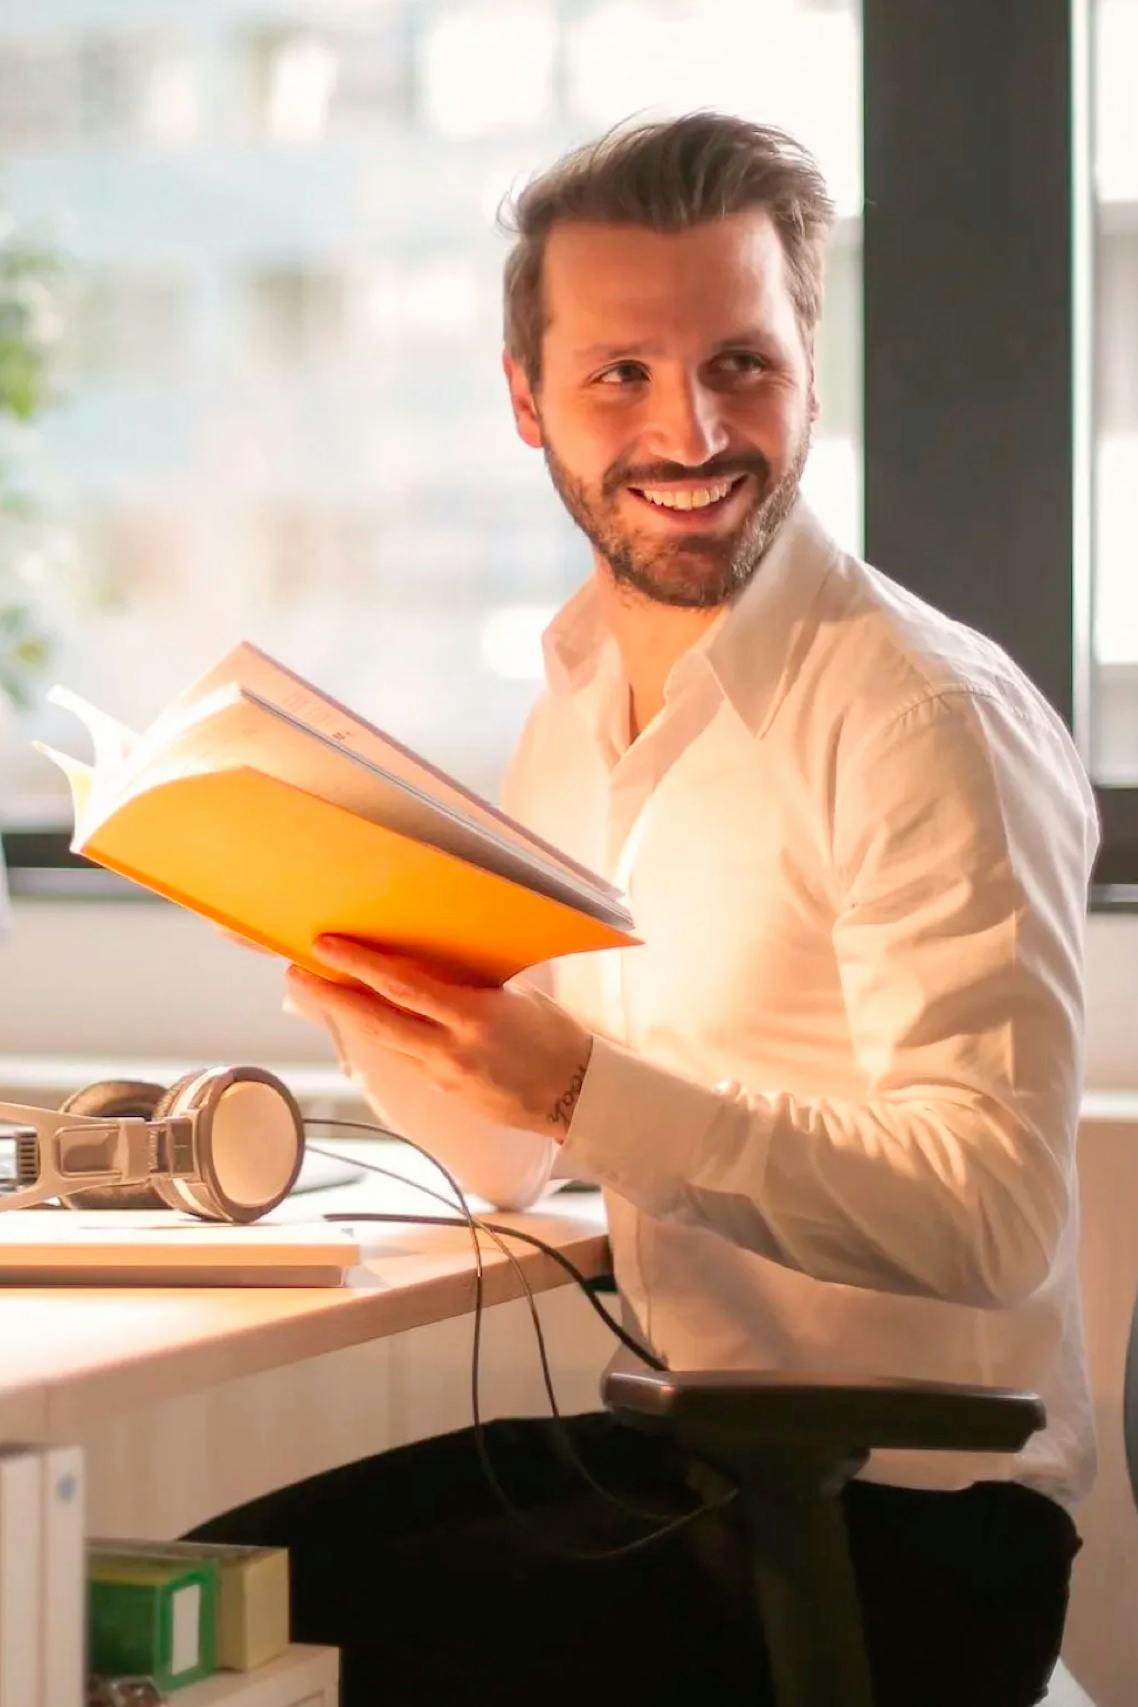 Man sitting at desk holding a book